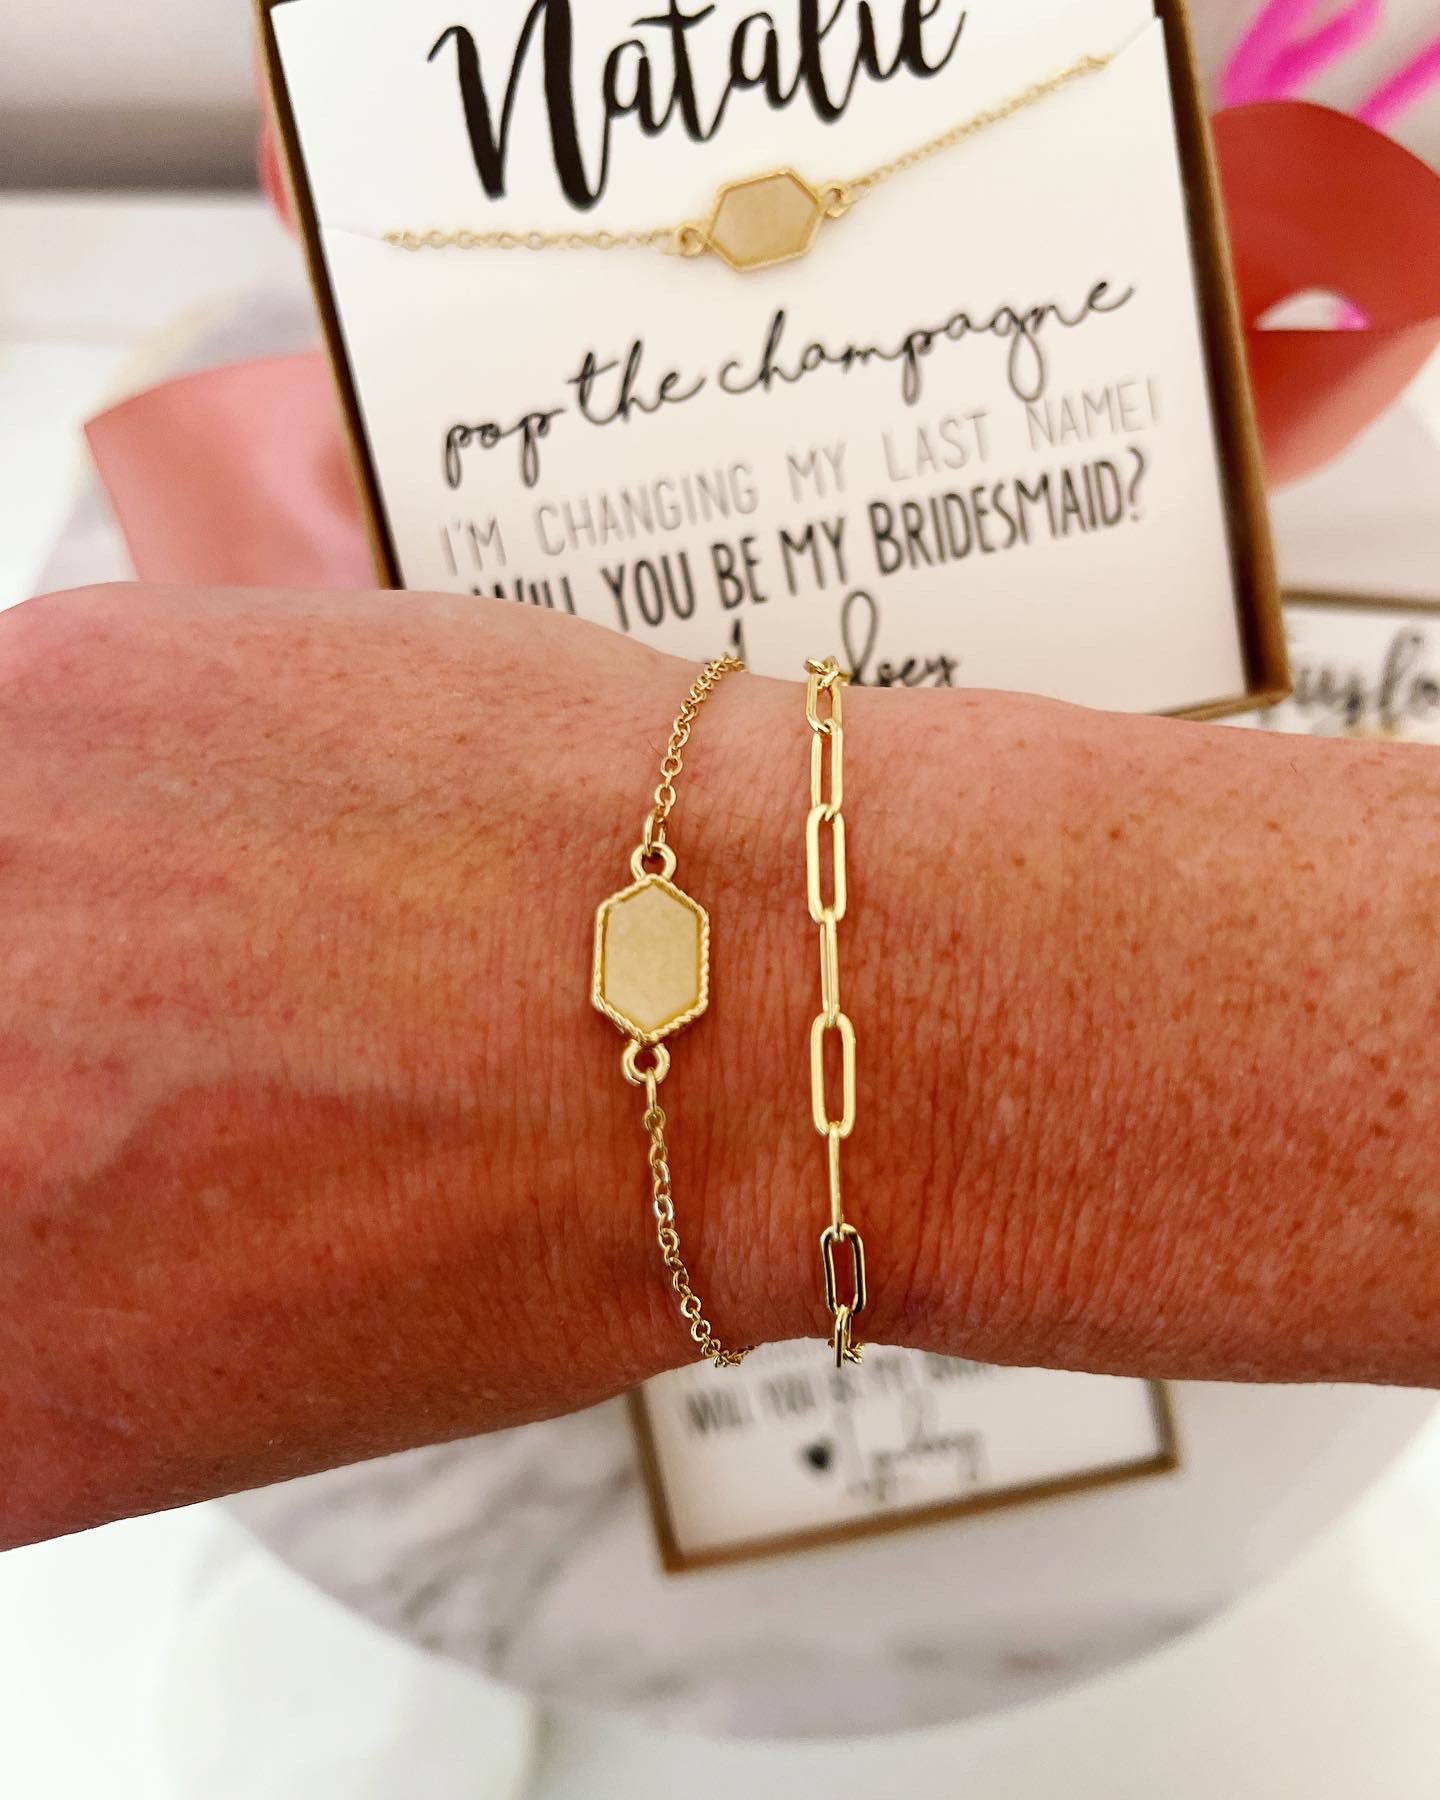 Pop the Champagne! Druzy Oval Stone OR Iridescent White+ Gold Bracelet for Bridesmaids